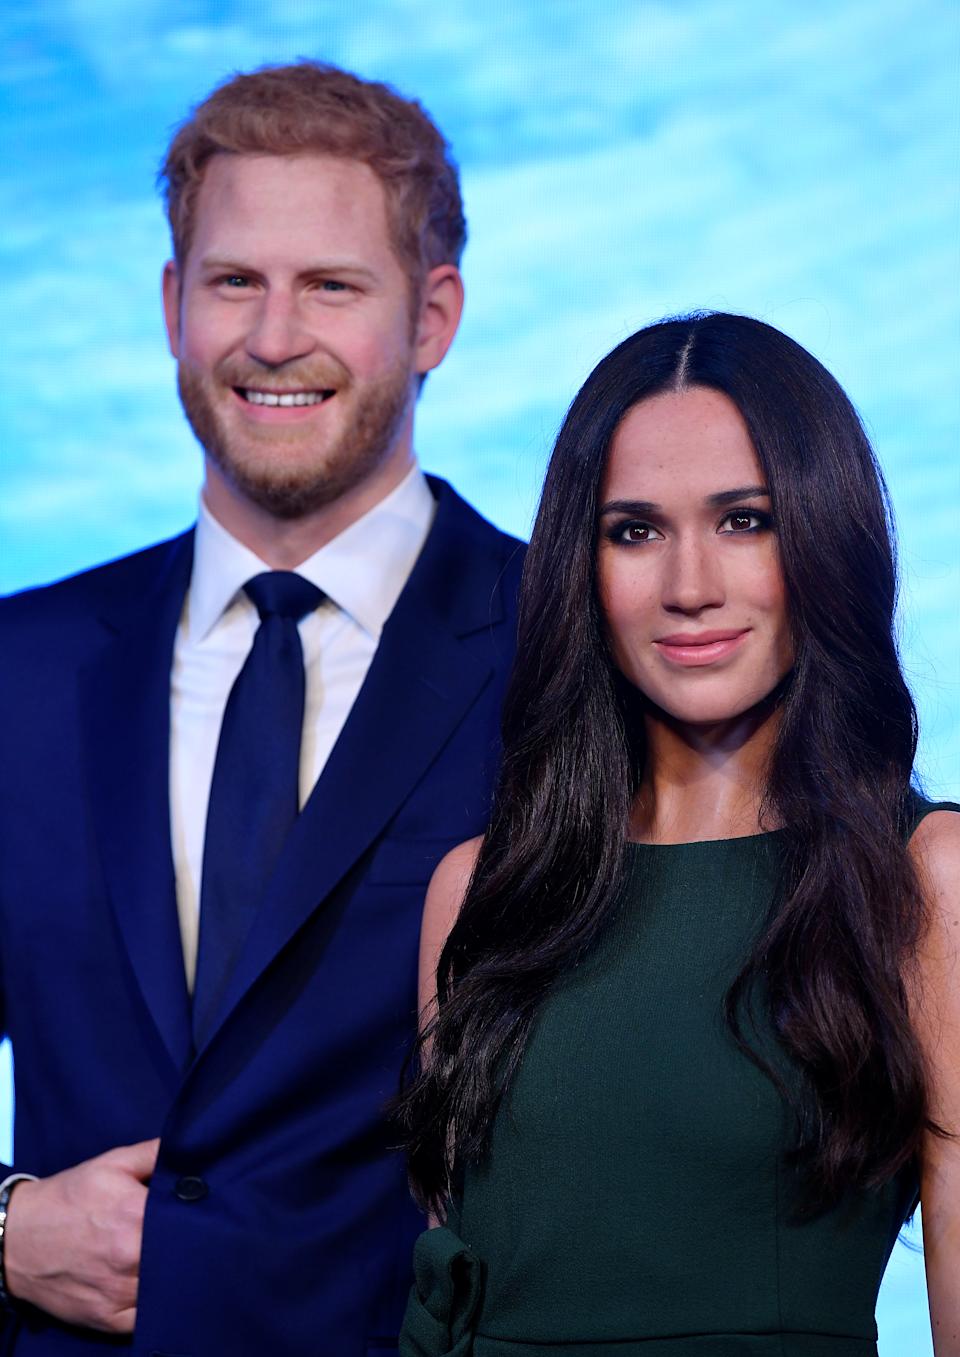 Wax models of British Prince Harry and his fiancée Meghan Markle are on display at Madame Tussauds in London, May 9, 2018. REUTERS / Toby Melville